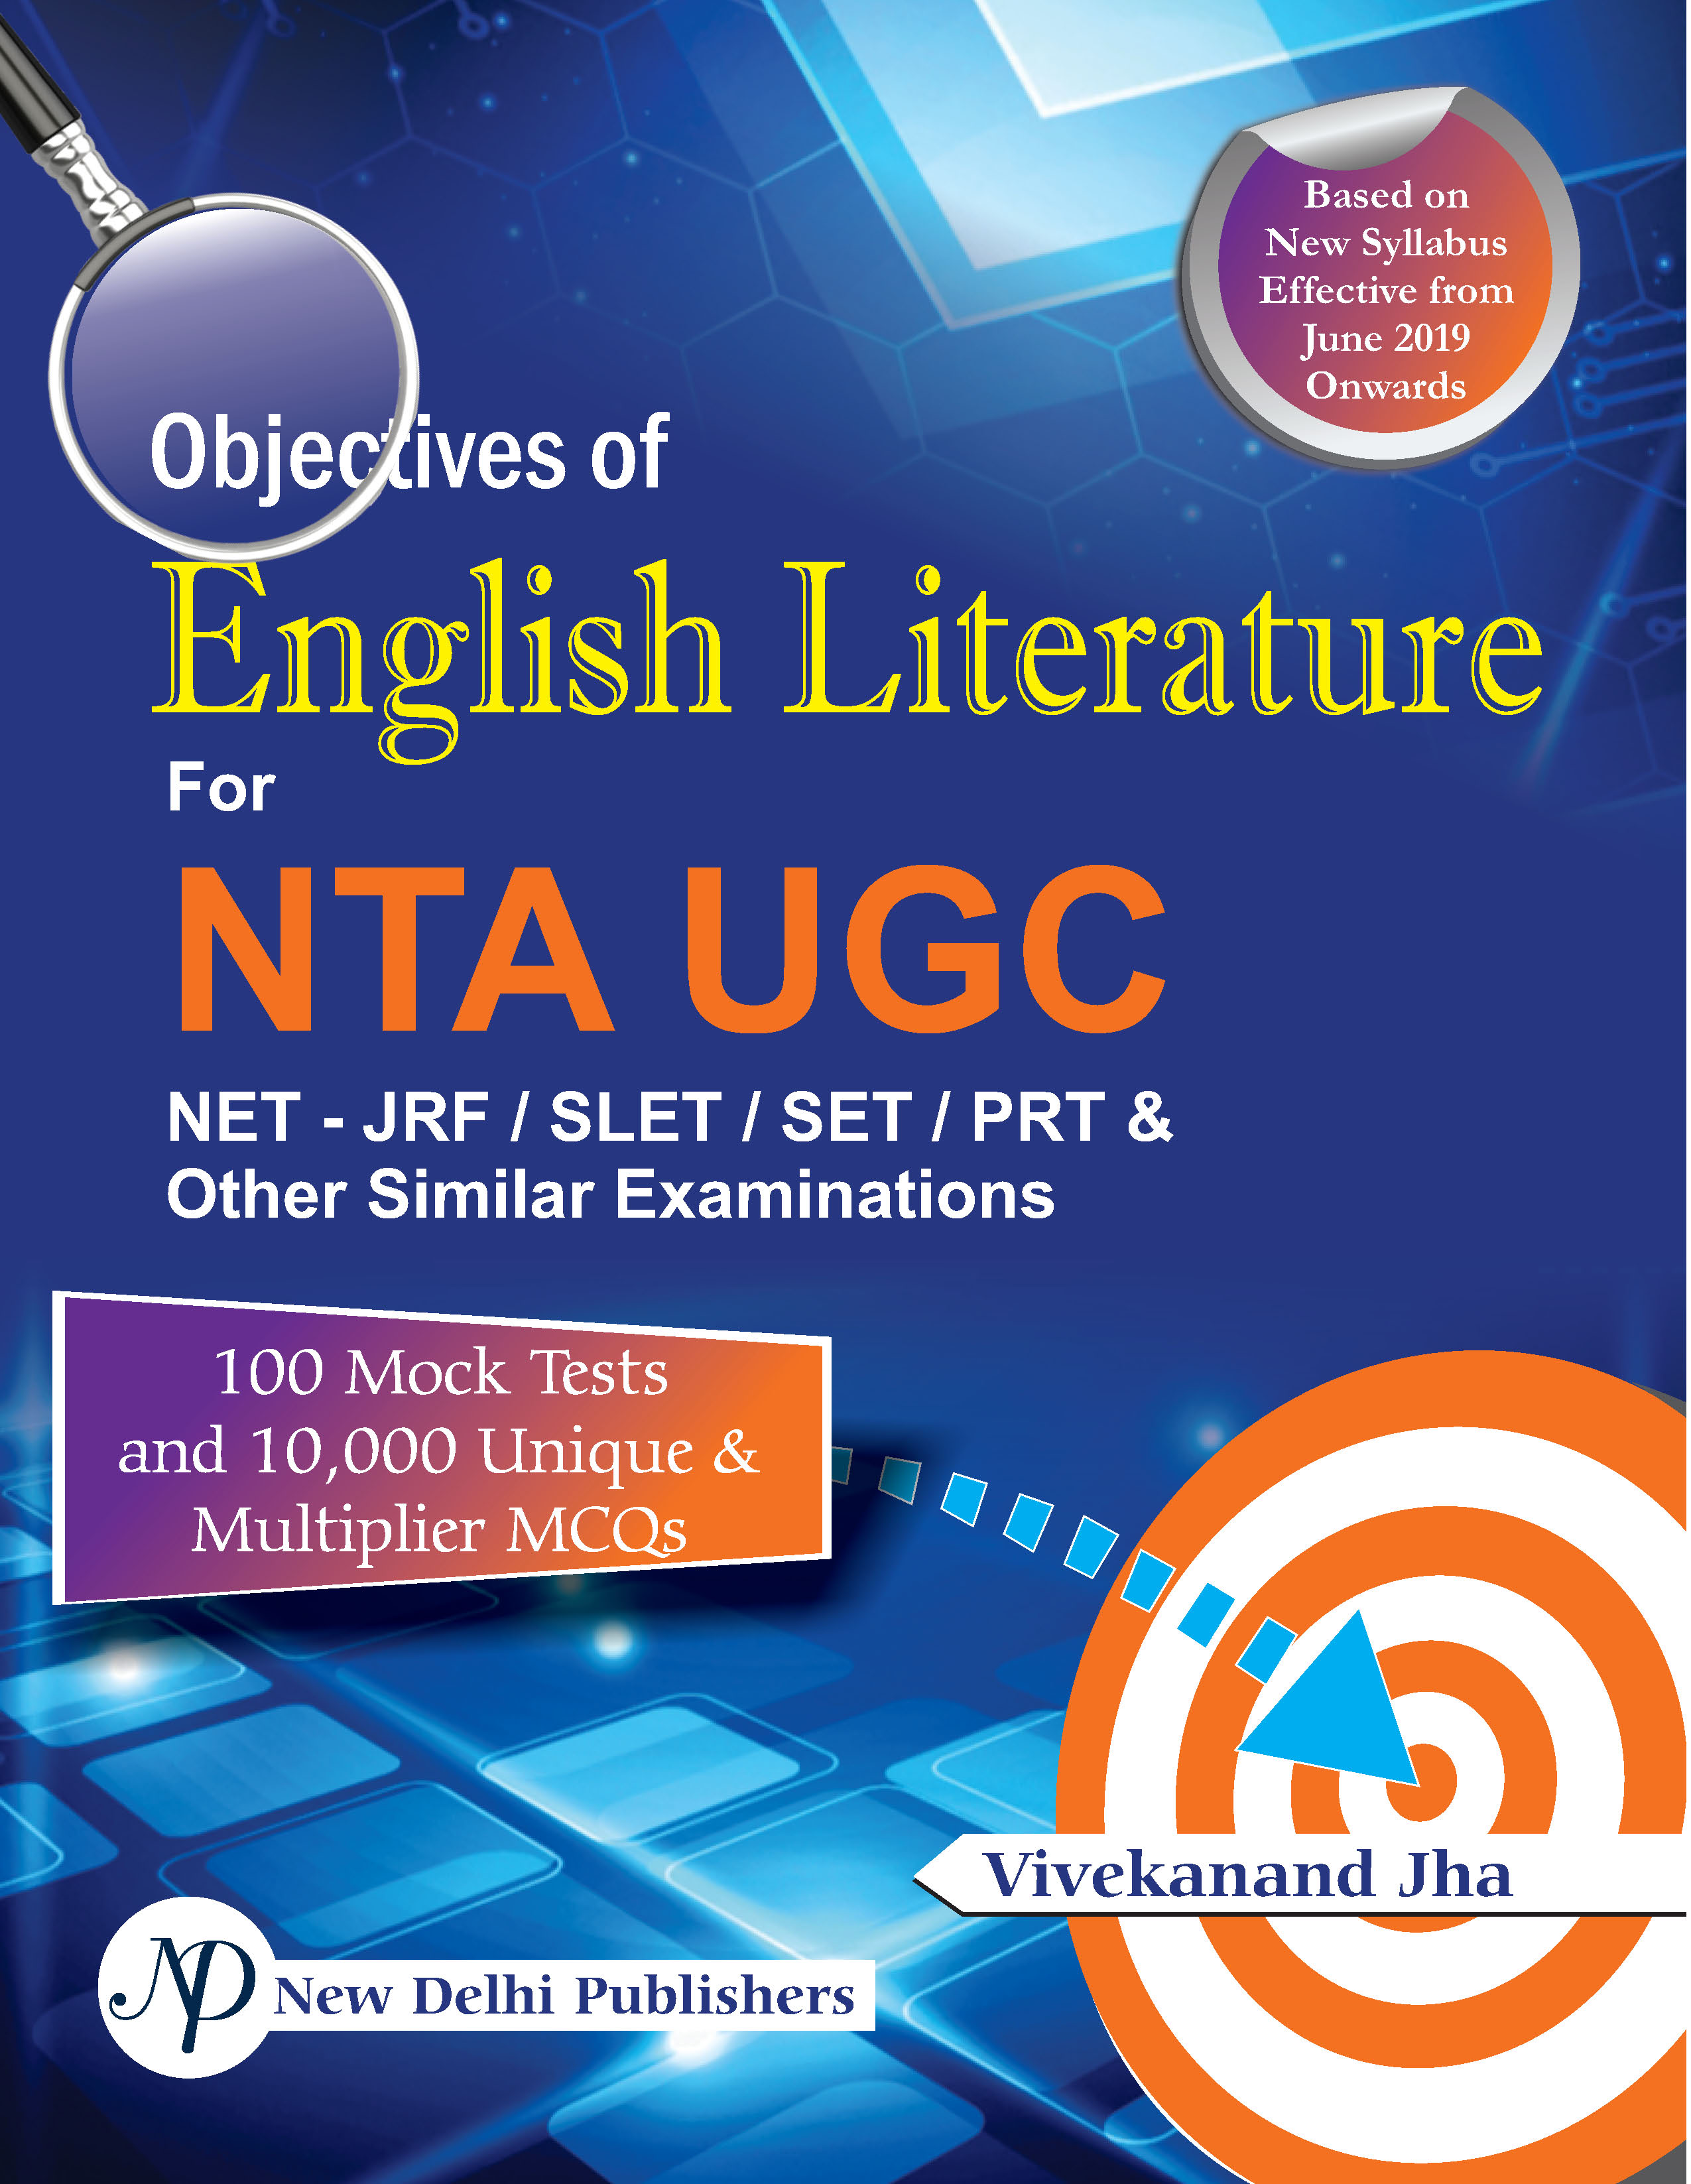 Objectives of English Literature 100 Mock Tests and 10,000 Unique & Multiplier MCQs for NTA UGC NET/JRF/SLET/SET/PRT & Other Similar Examinations